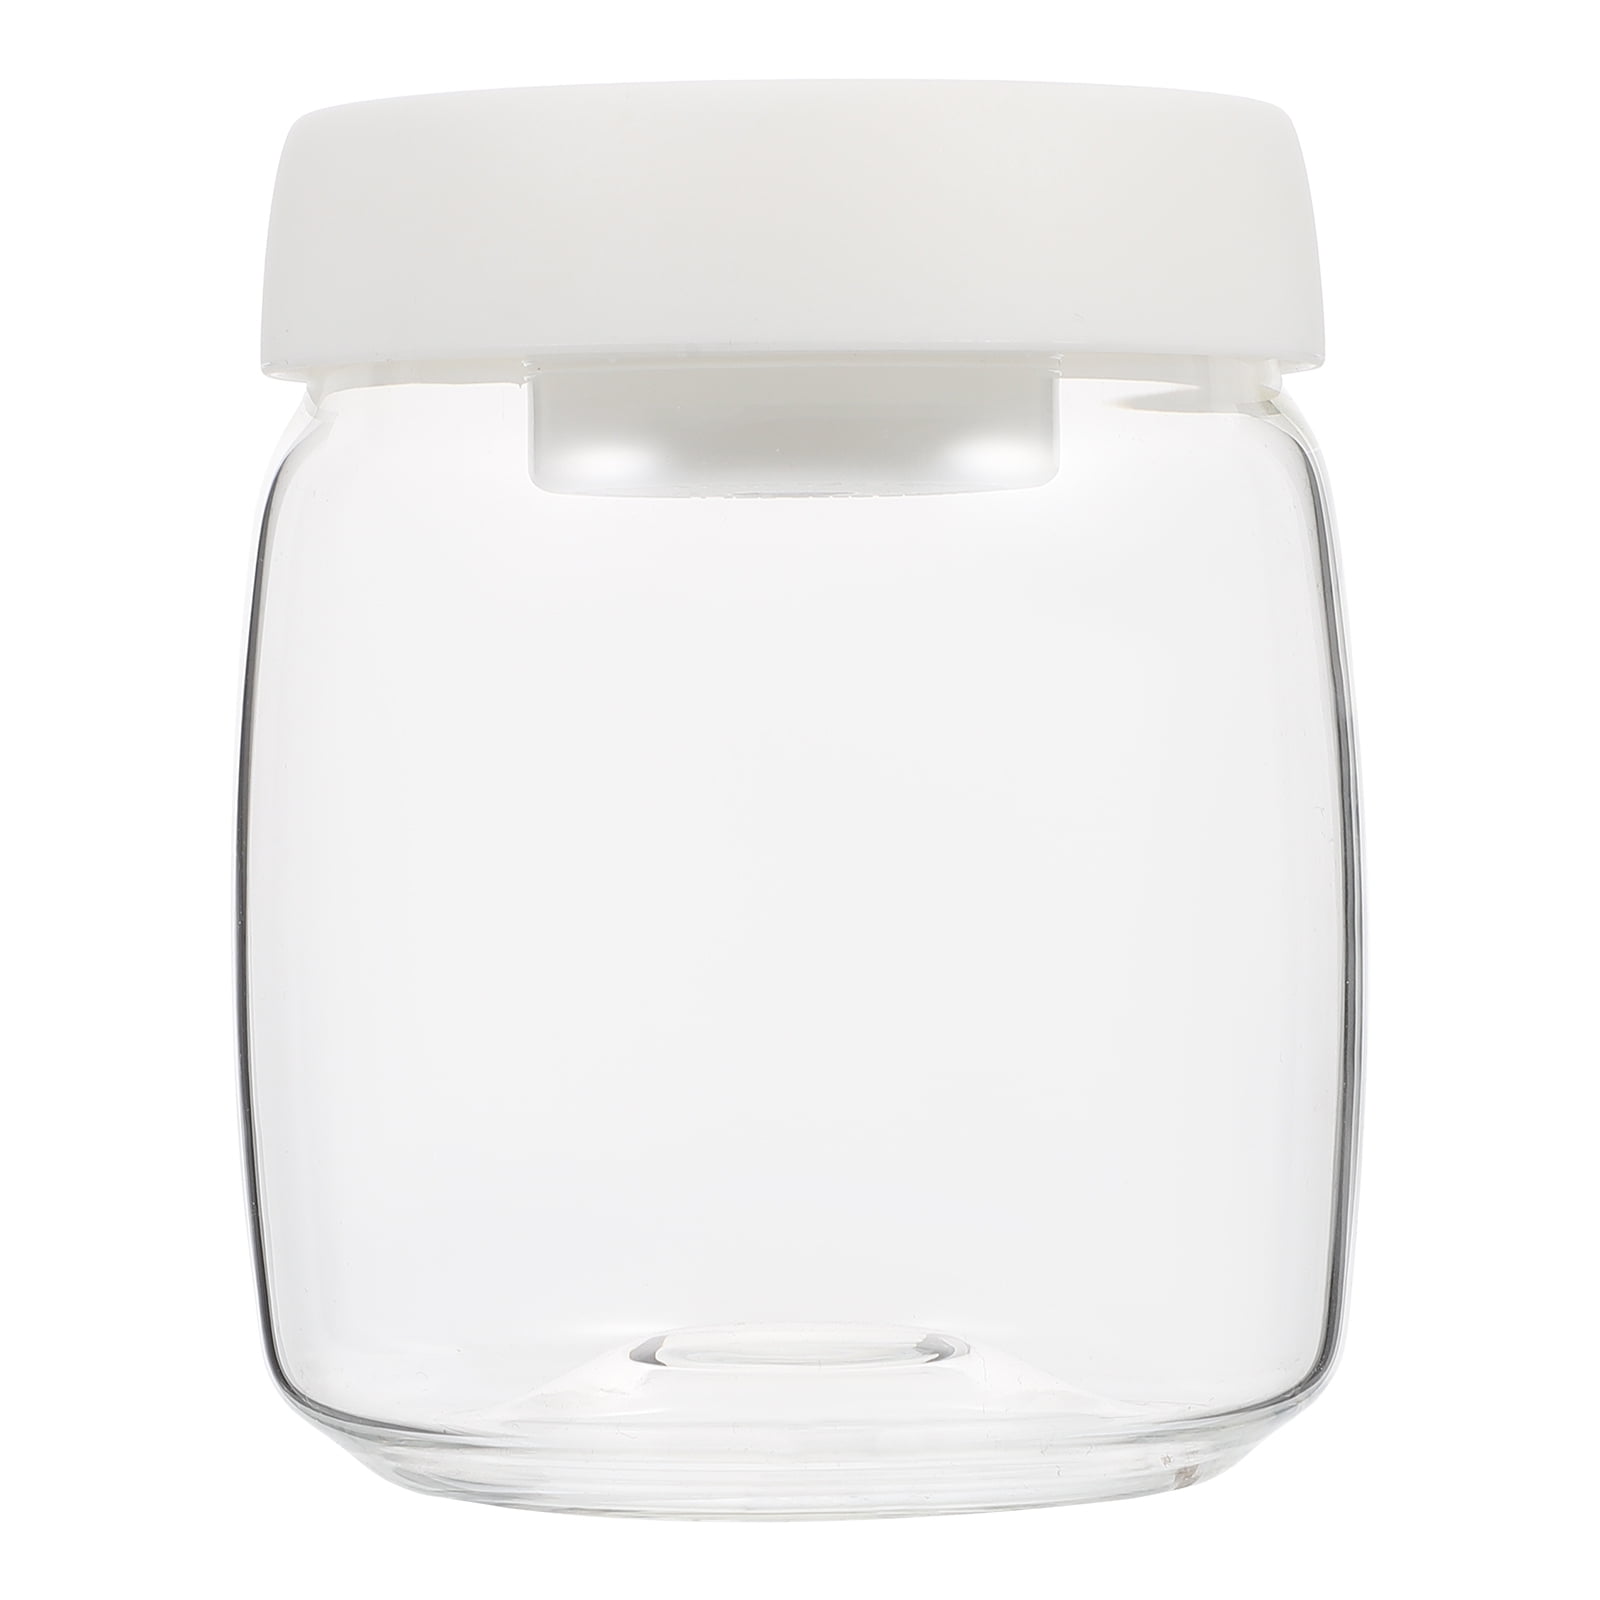 Large Capacity Mason Jar, 1 Gallon Wide Mouth Glass Cookie Jar, Food  Container with Screw-on Metal Lid (1PC)